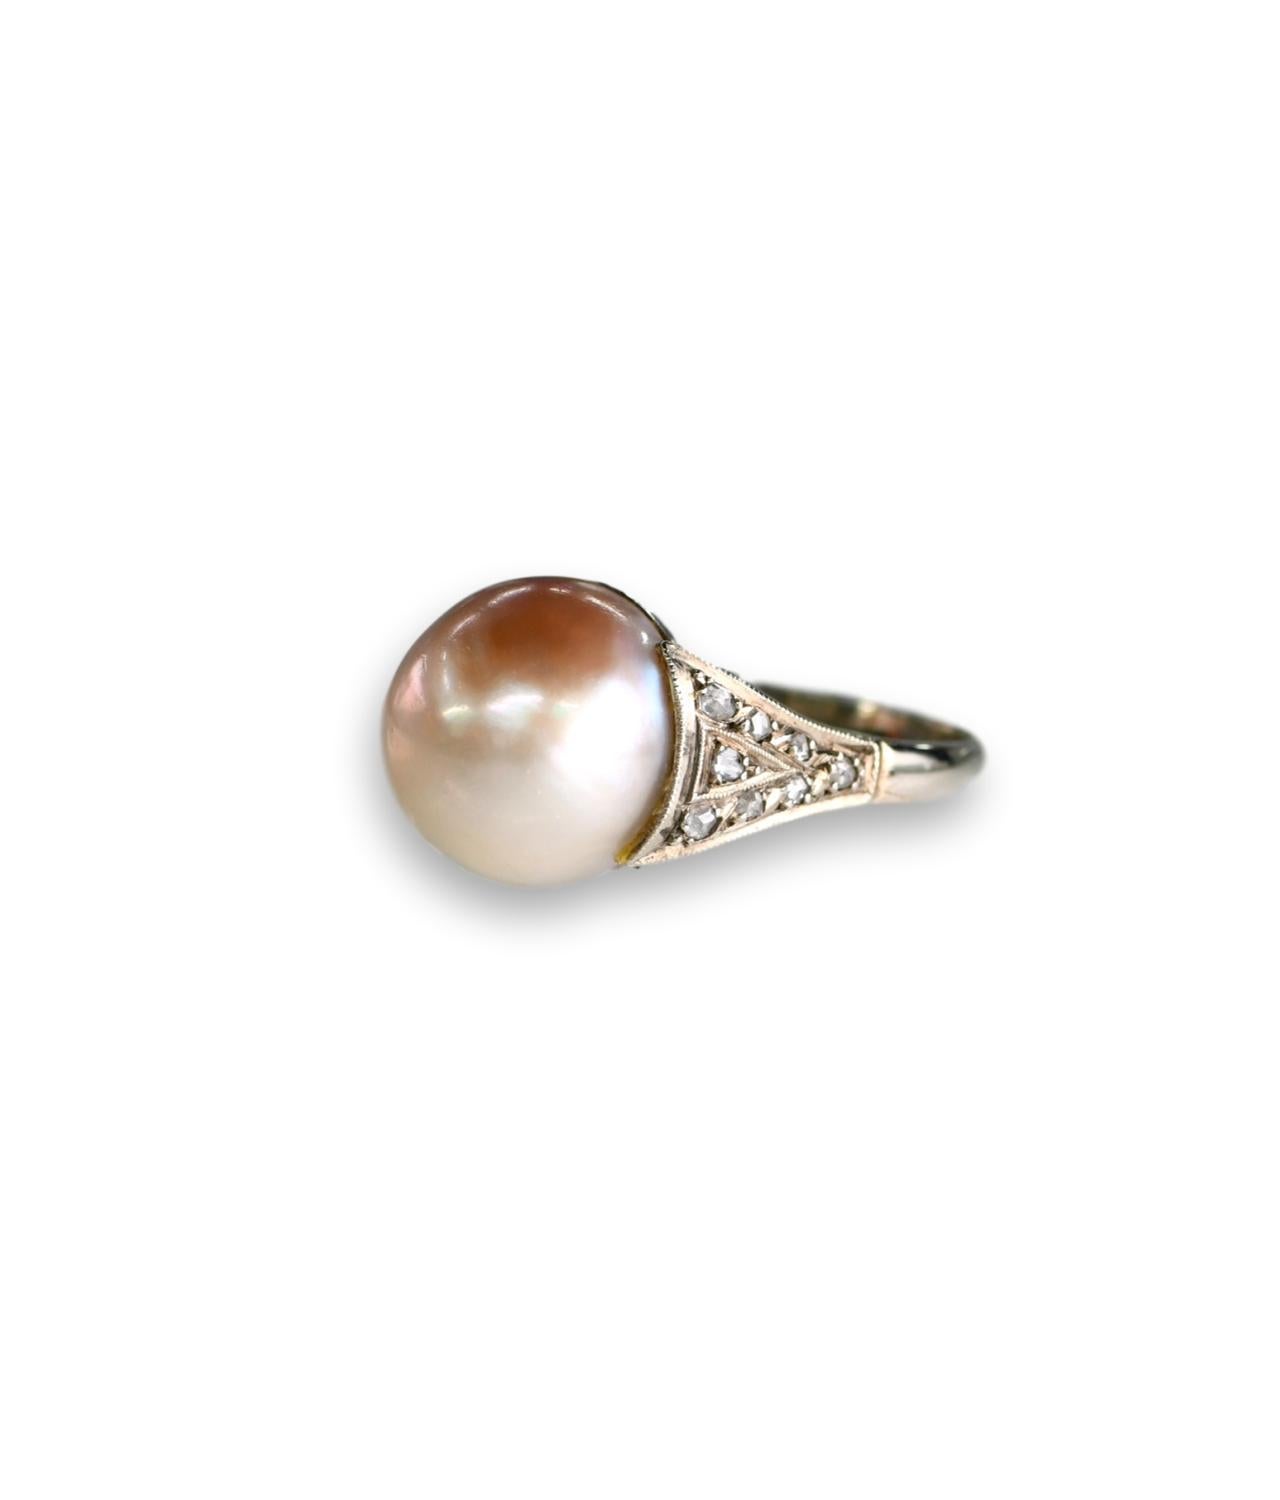 This striking Edwardian ring  features a radiant 12.5mm South Sea pearl which is perfectly offset by the  diamond shoulders. Very charming elegant style,  perfect condition.

Pearl Size: 12.5
Weight: 4.8g
Diamond Weight: 0.5ct